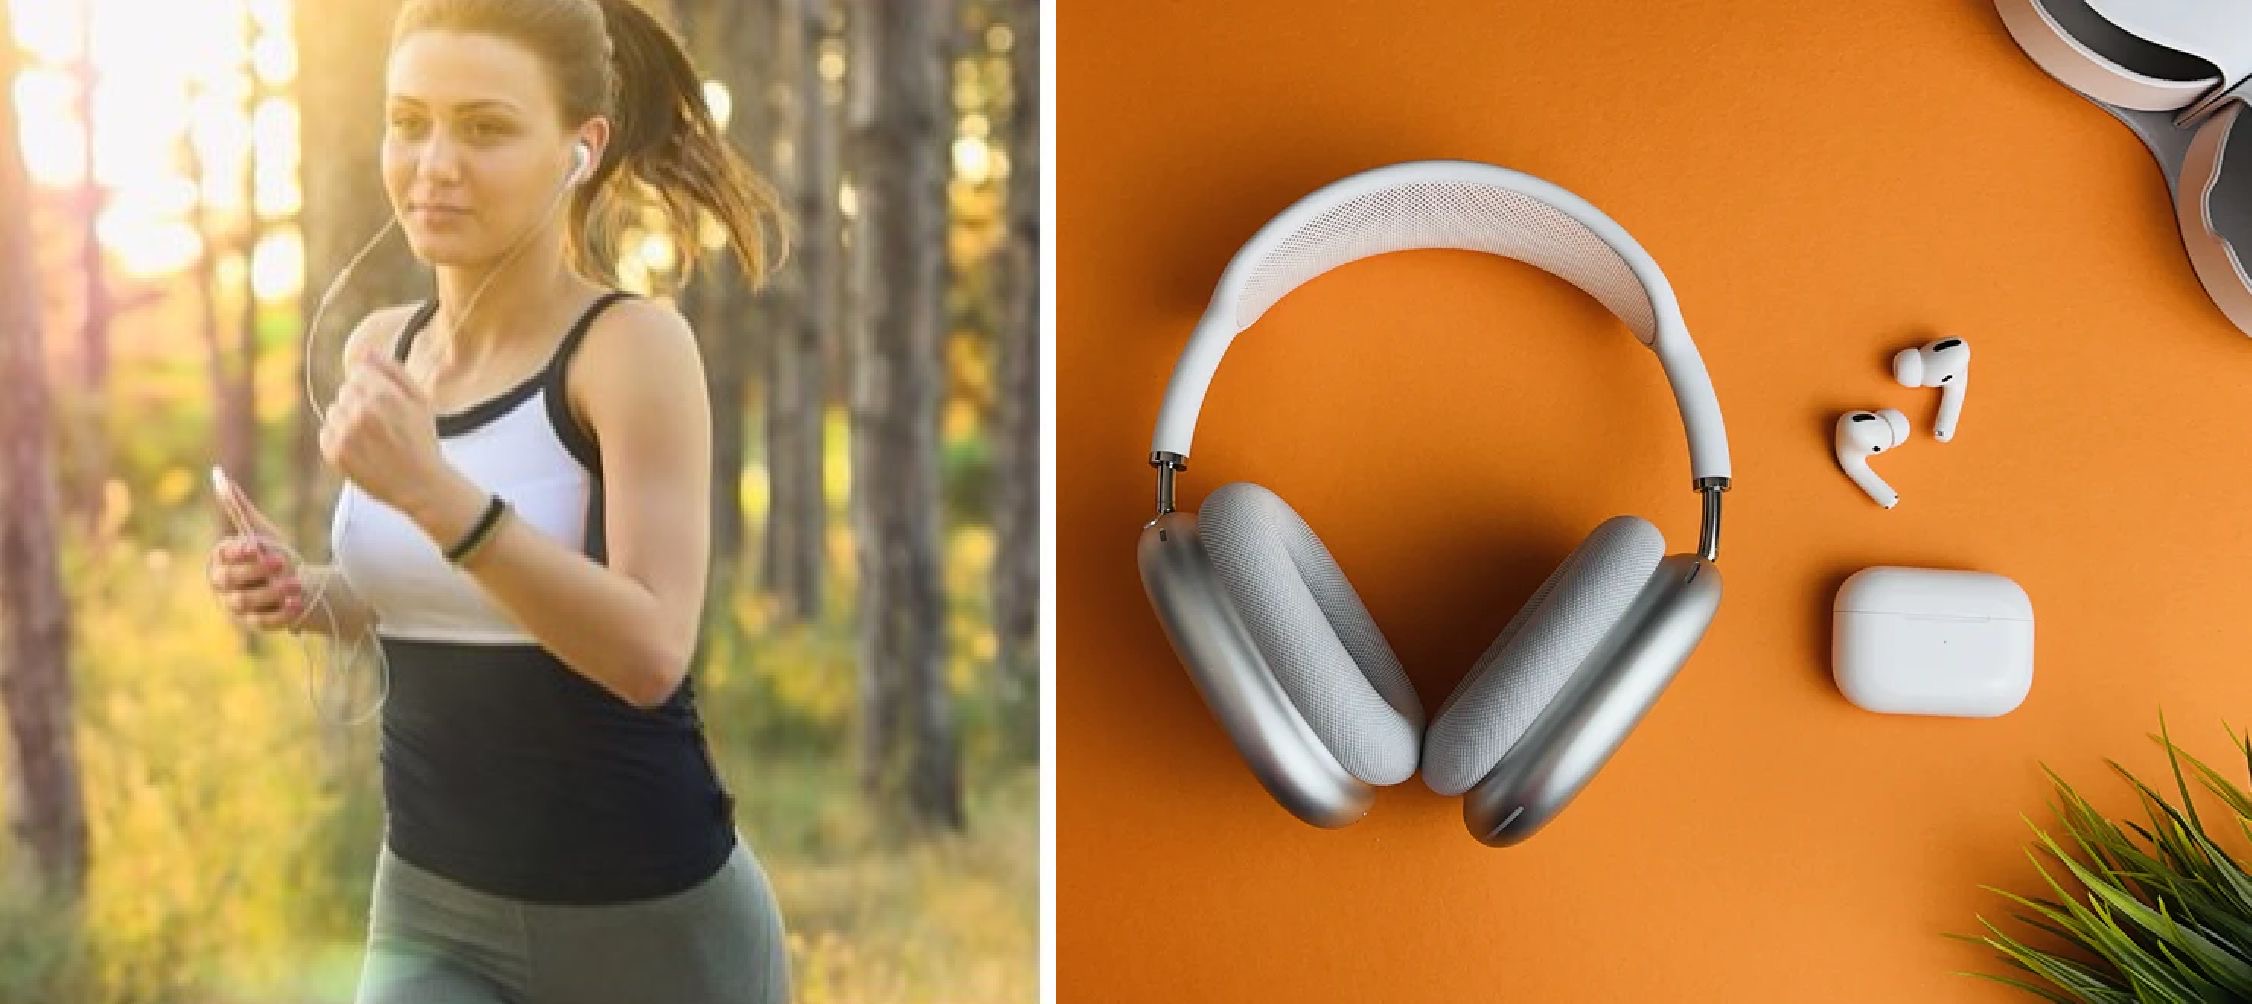 The 25 Best Workout Songs to Level Up Your Fitness Journey